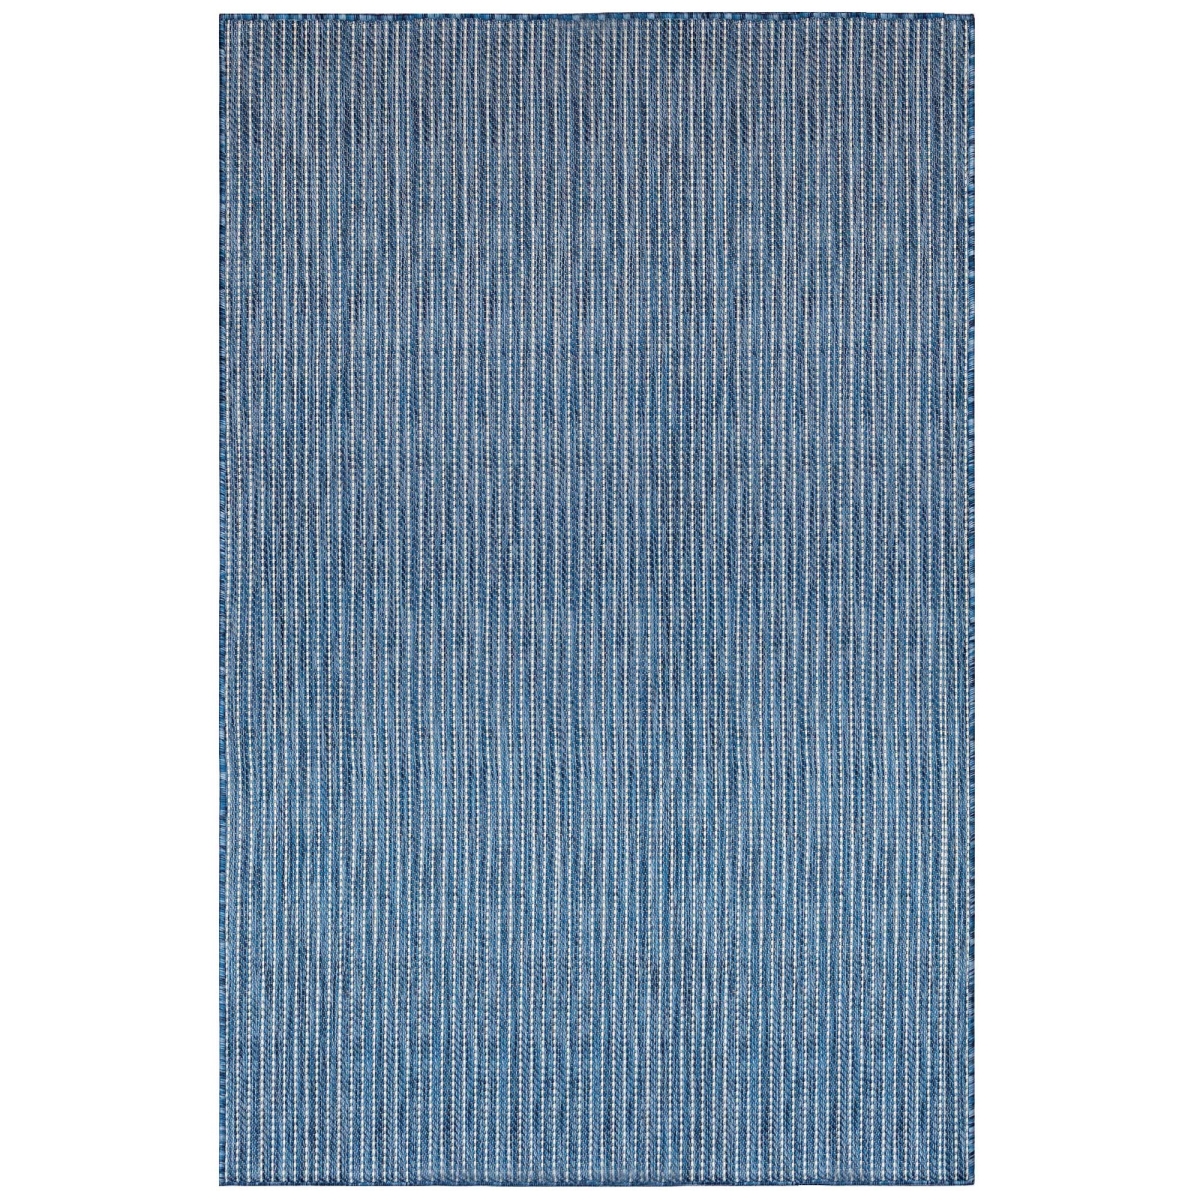 Trans-ocean Imports Cre45842233 39 In. X 59 In. Liora Manne Carmel Texture Stripe Indoor & Outdoor Wilton Woven Rectangle Rug - Navy